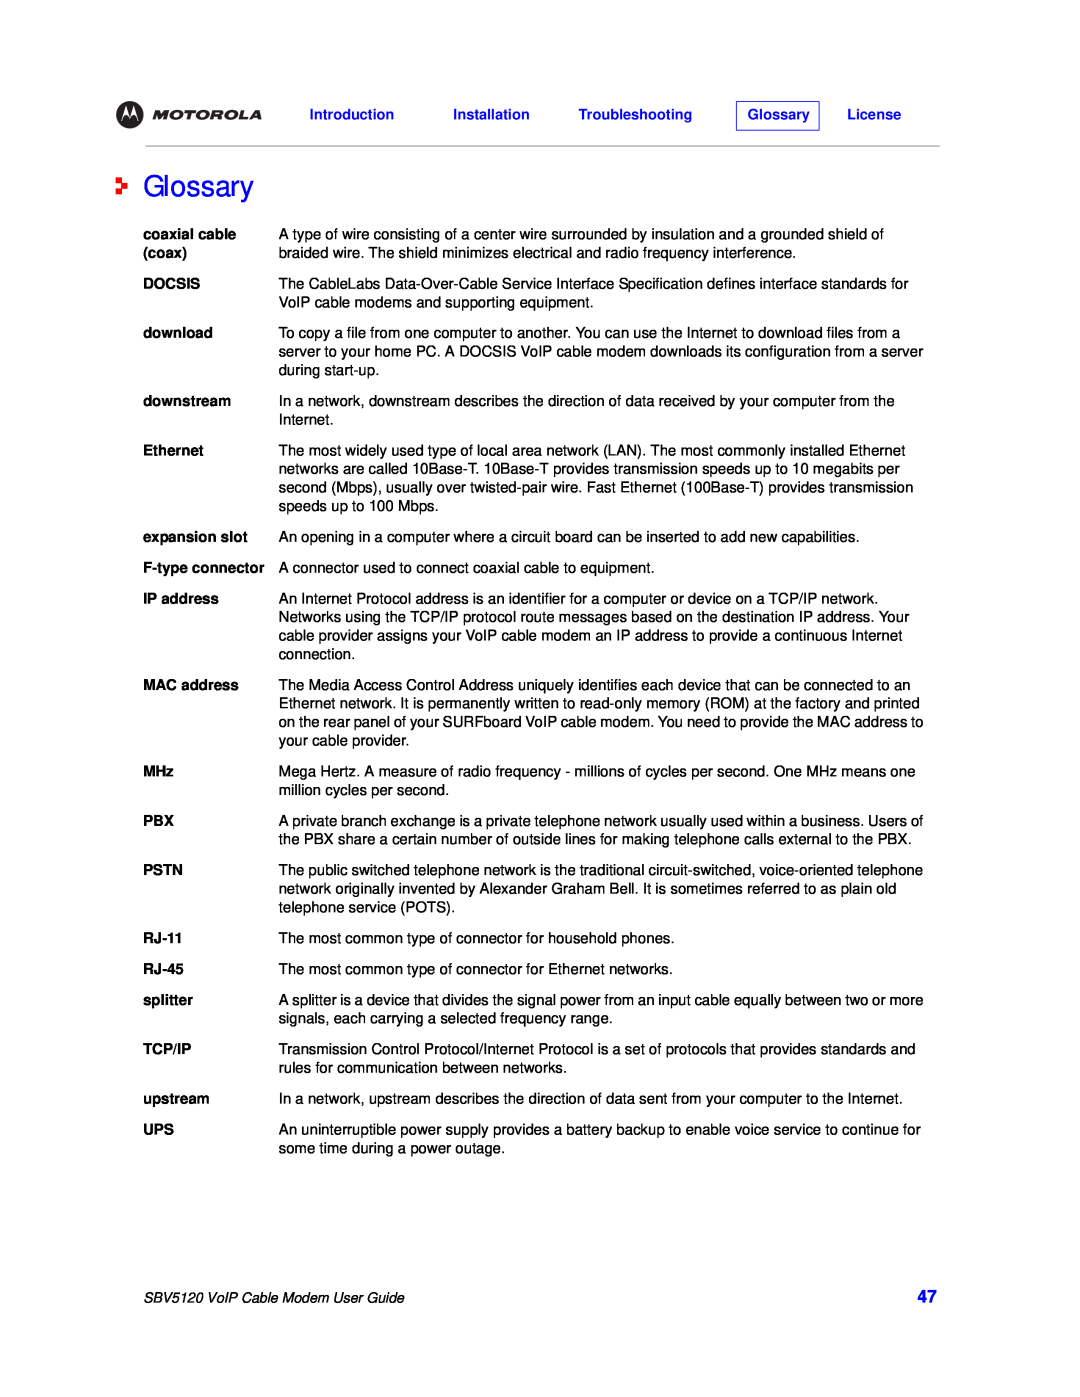 Motorola manual Glossary, Introduction Installation Troubleshooting, License, SBV5120 VoIP Cable Modem User Guide 